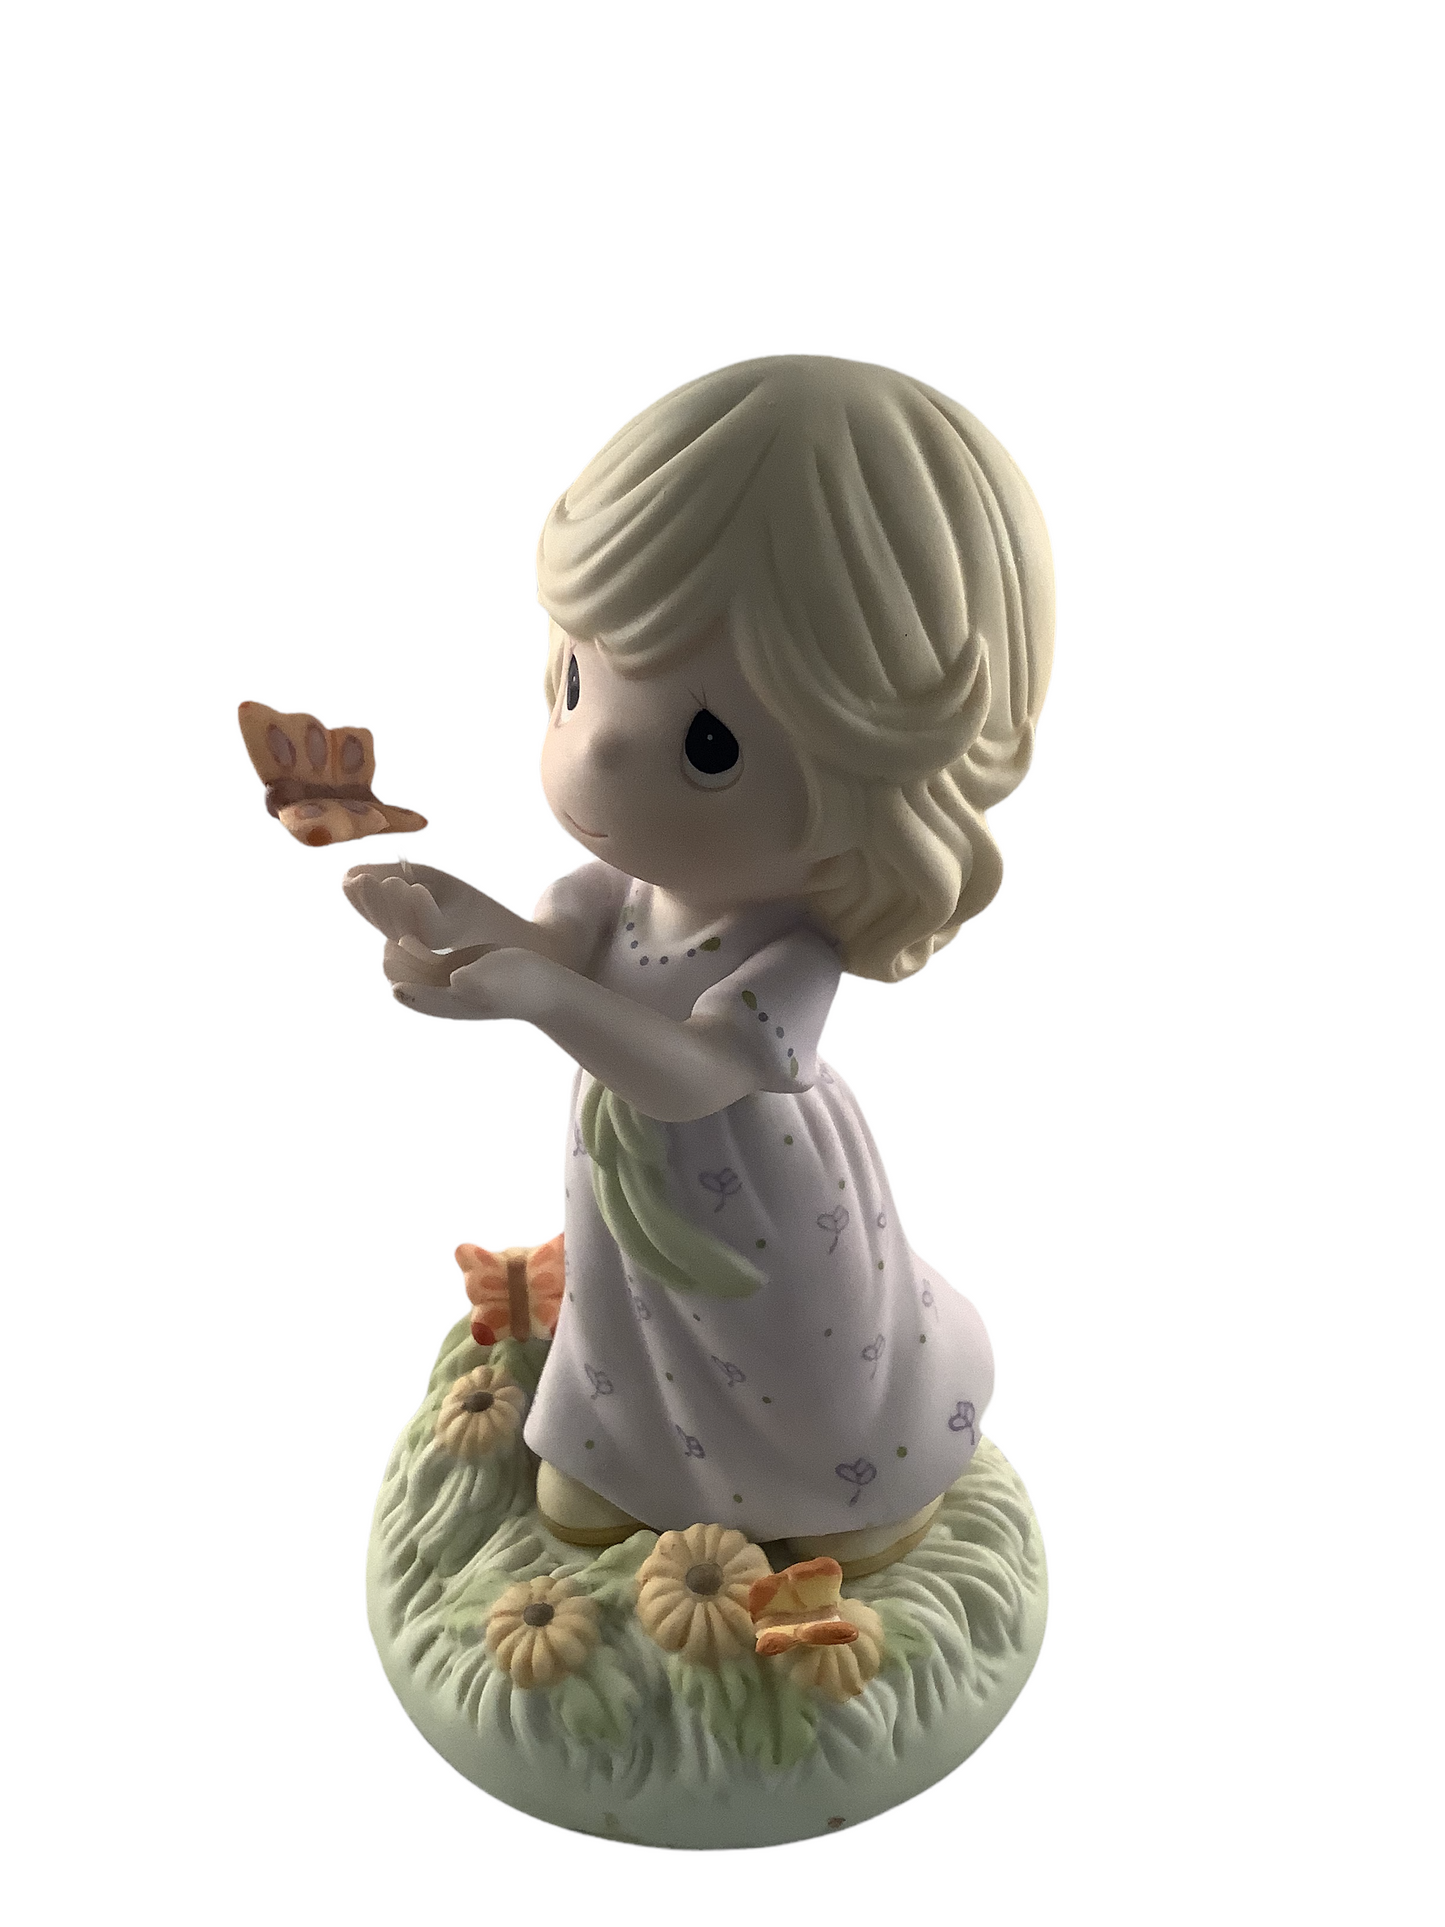 You Gave Me Wings To Fly - Precious Moment Figurine